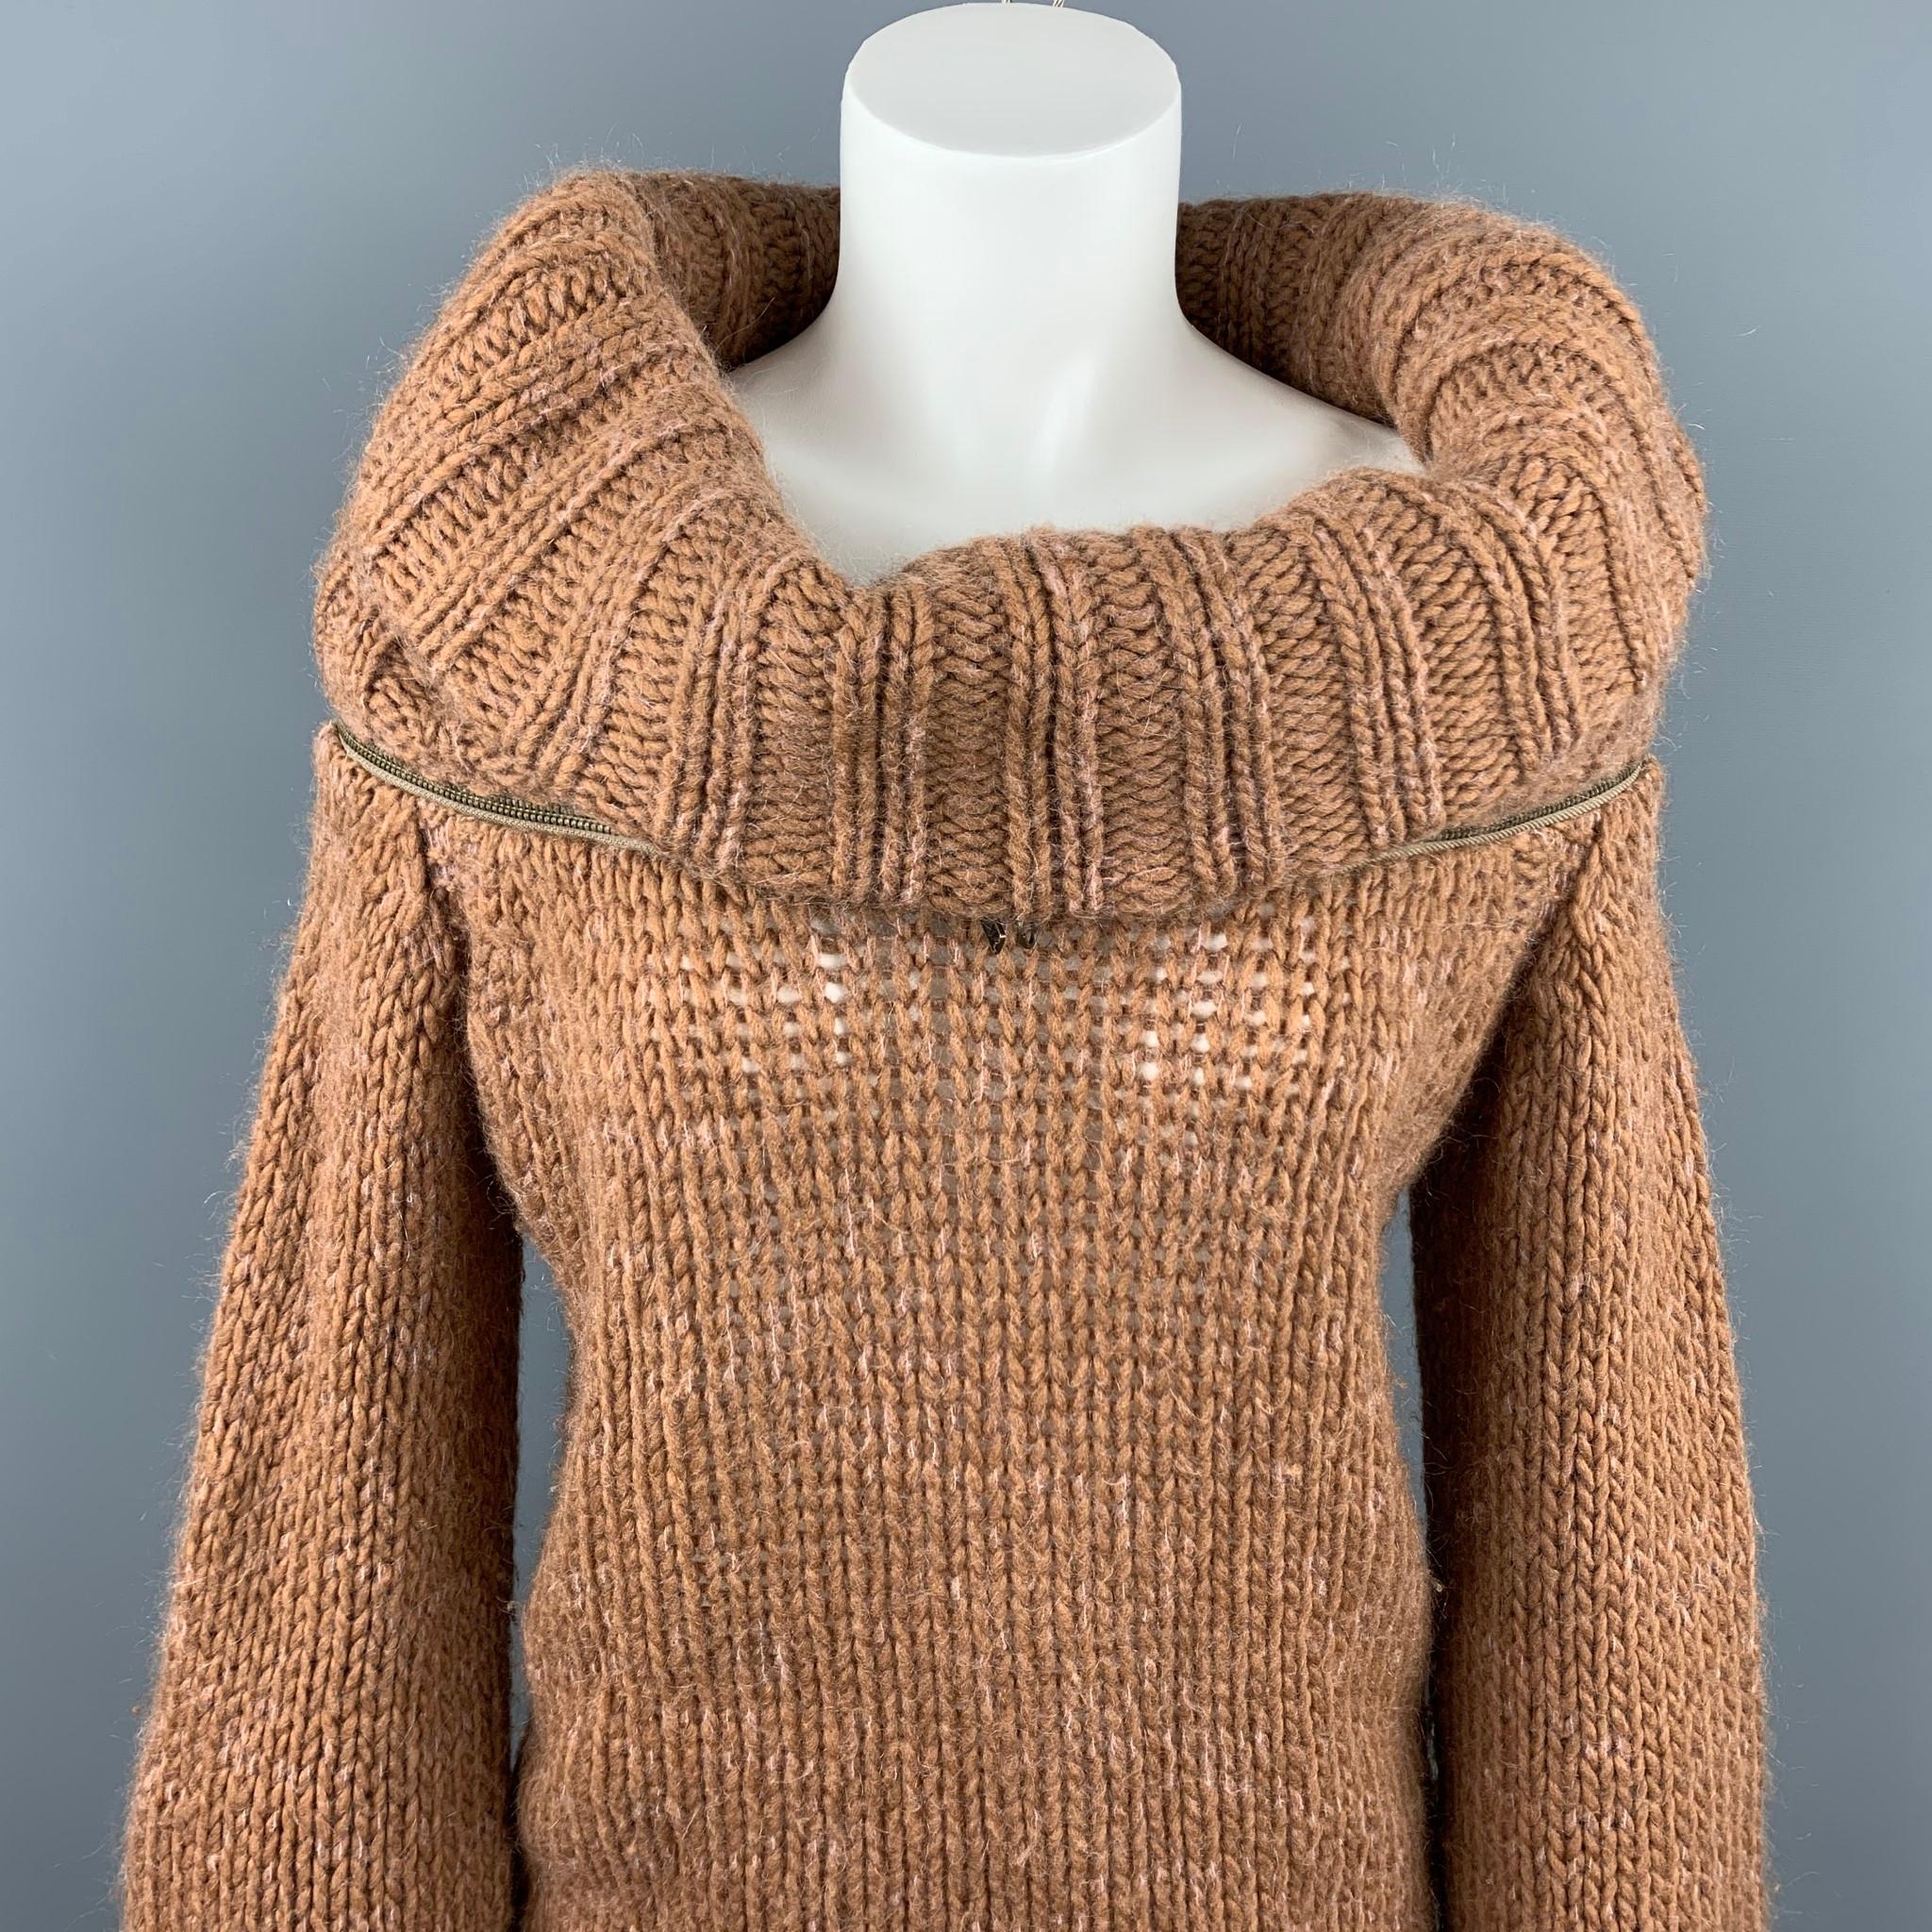 A.F. VANDERVORST sweater comes in a camel mohair blend featuring a cowl neck, red embroidered cross, and a zipper detail. Made in Belgium.

Very Good Pre-Owned Condition.
Marked: S

Measurements:

Shoulder: 17 in.
Bust: 40 in.
Sleeve: 25 in.
Length: